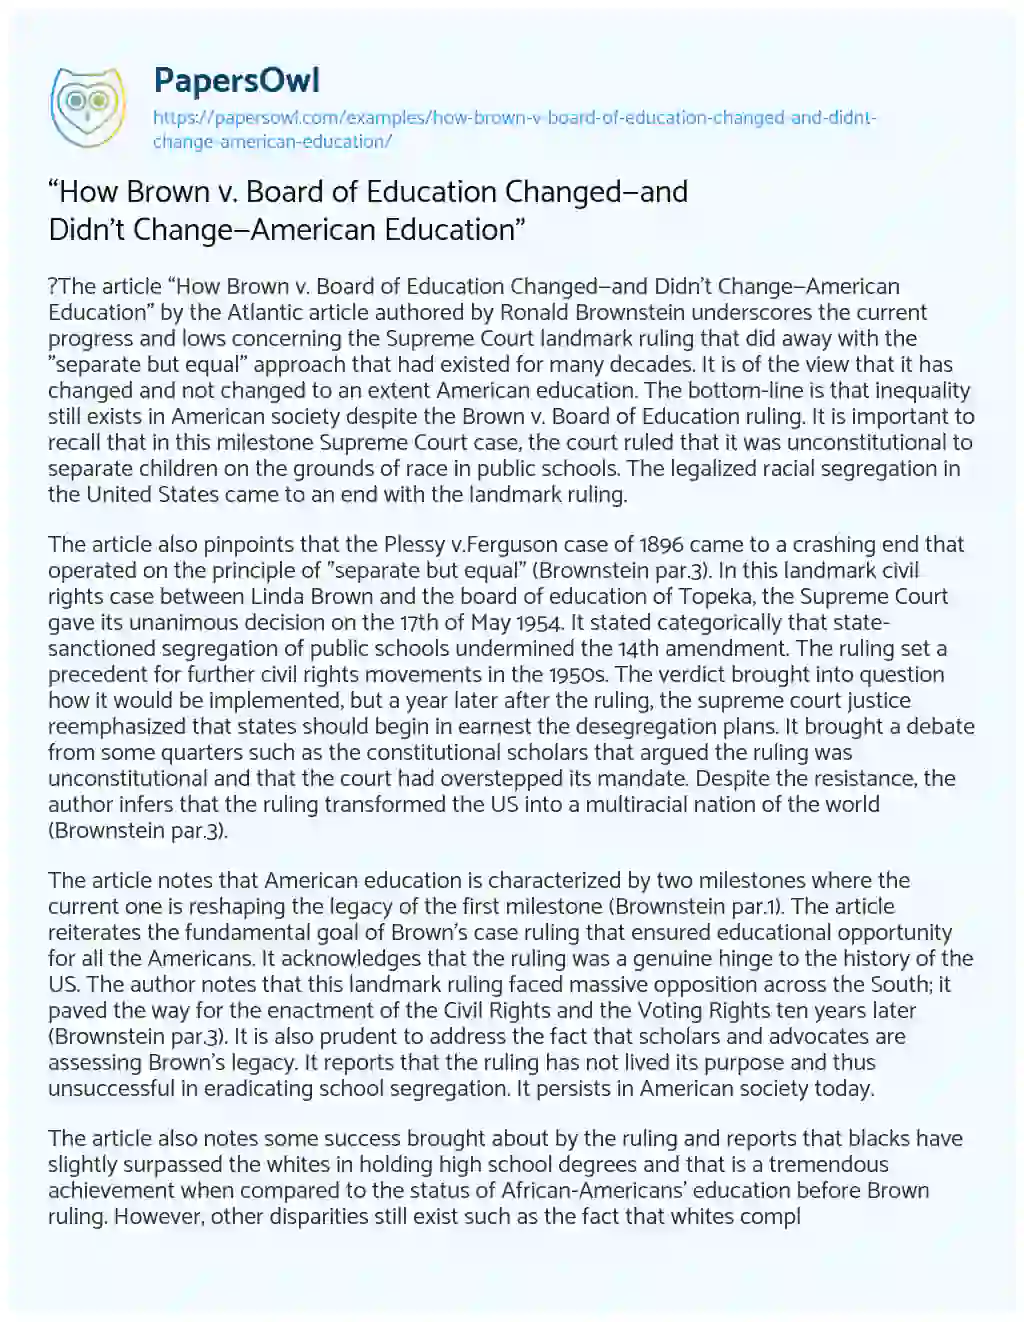 “How Brown V. Board of Education Changed—and didn’t Change—American Education” essay